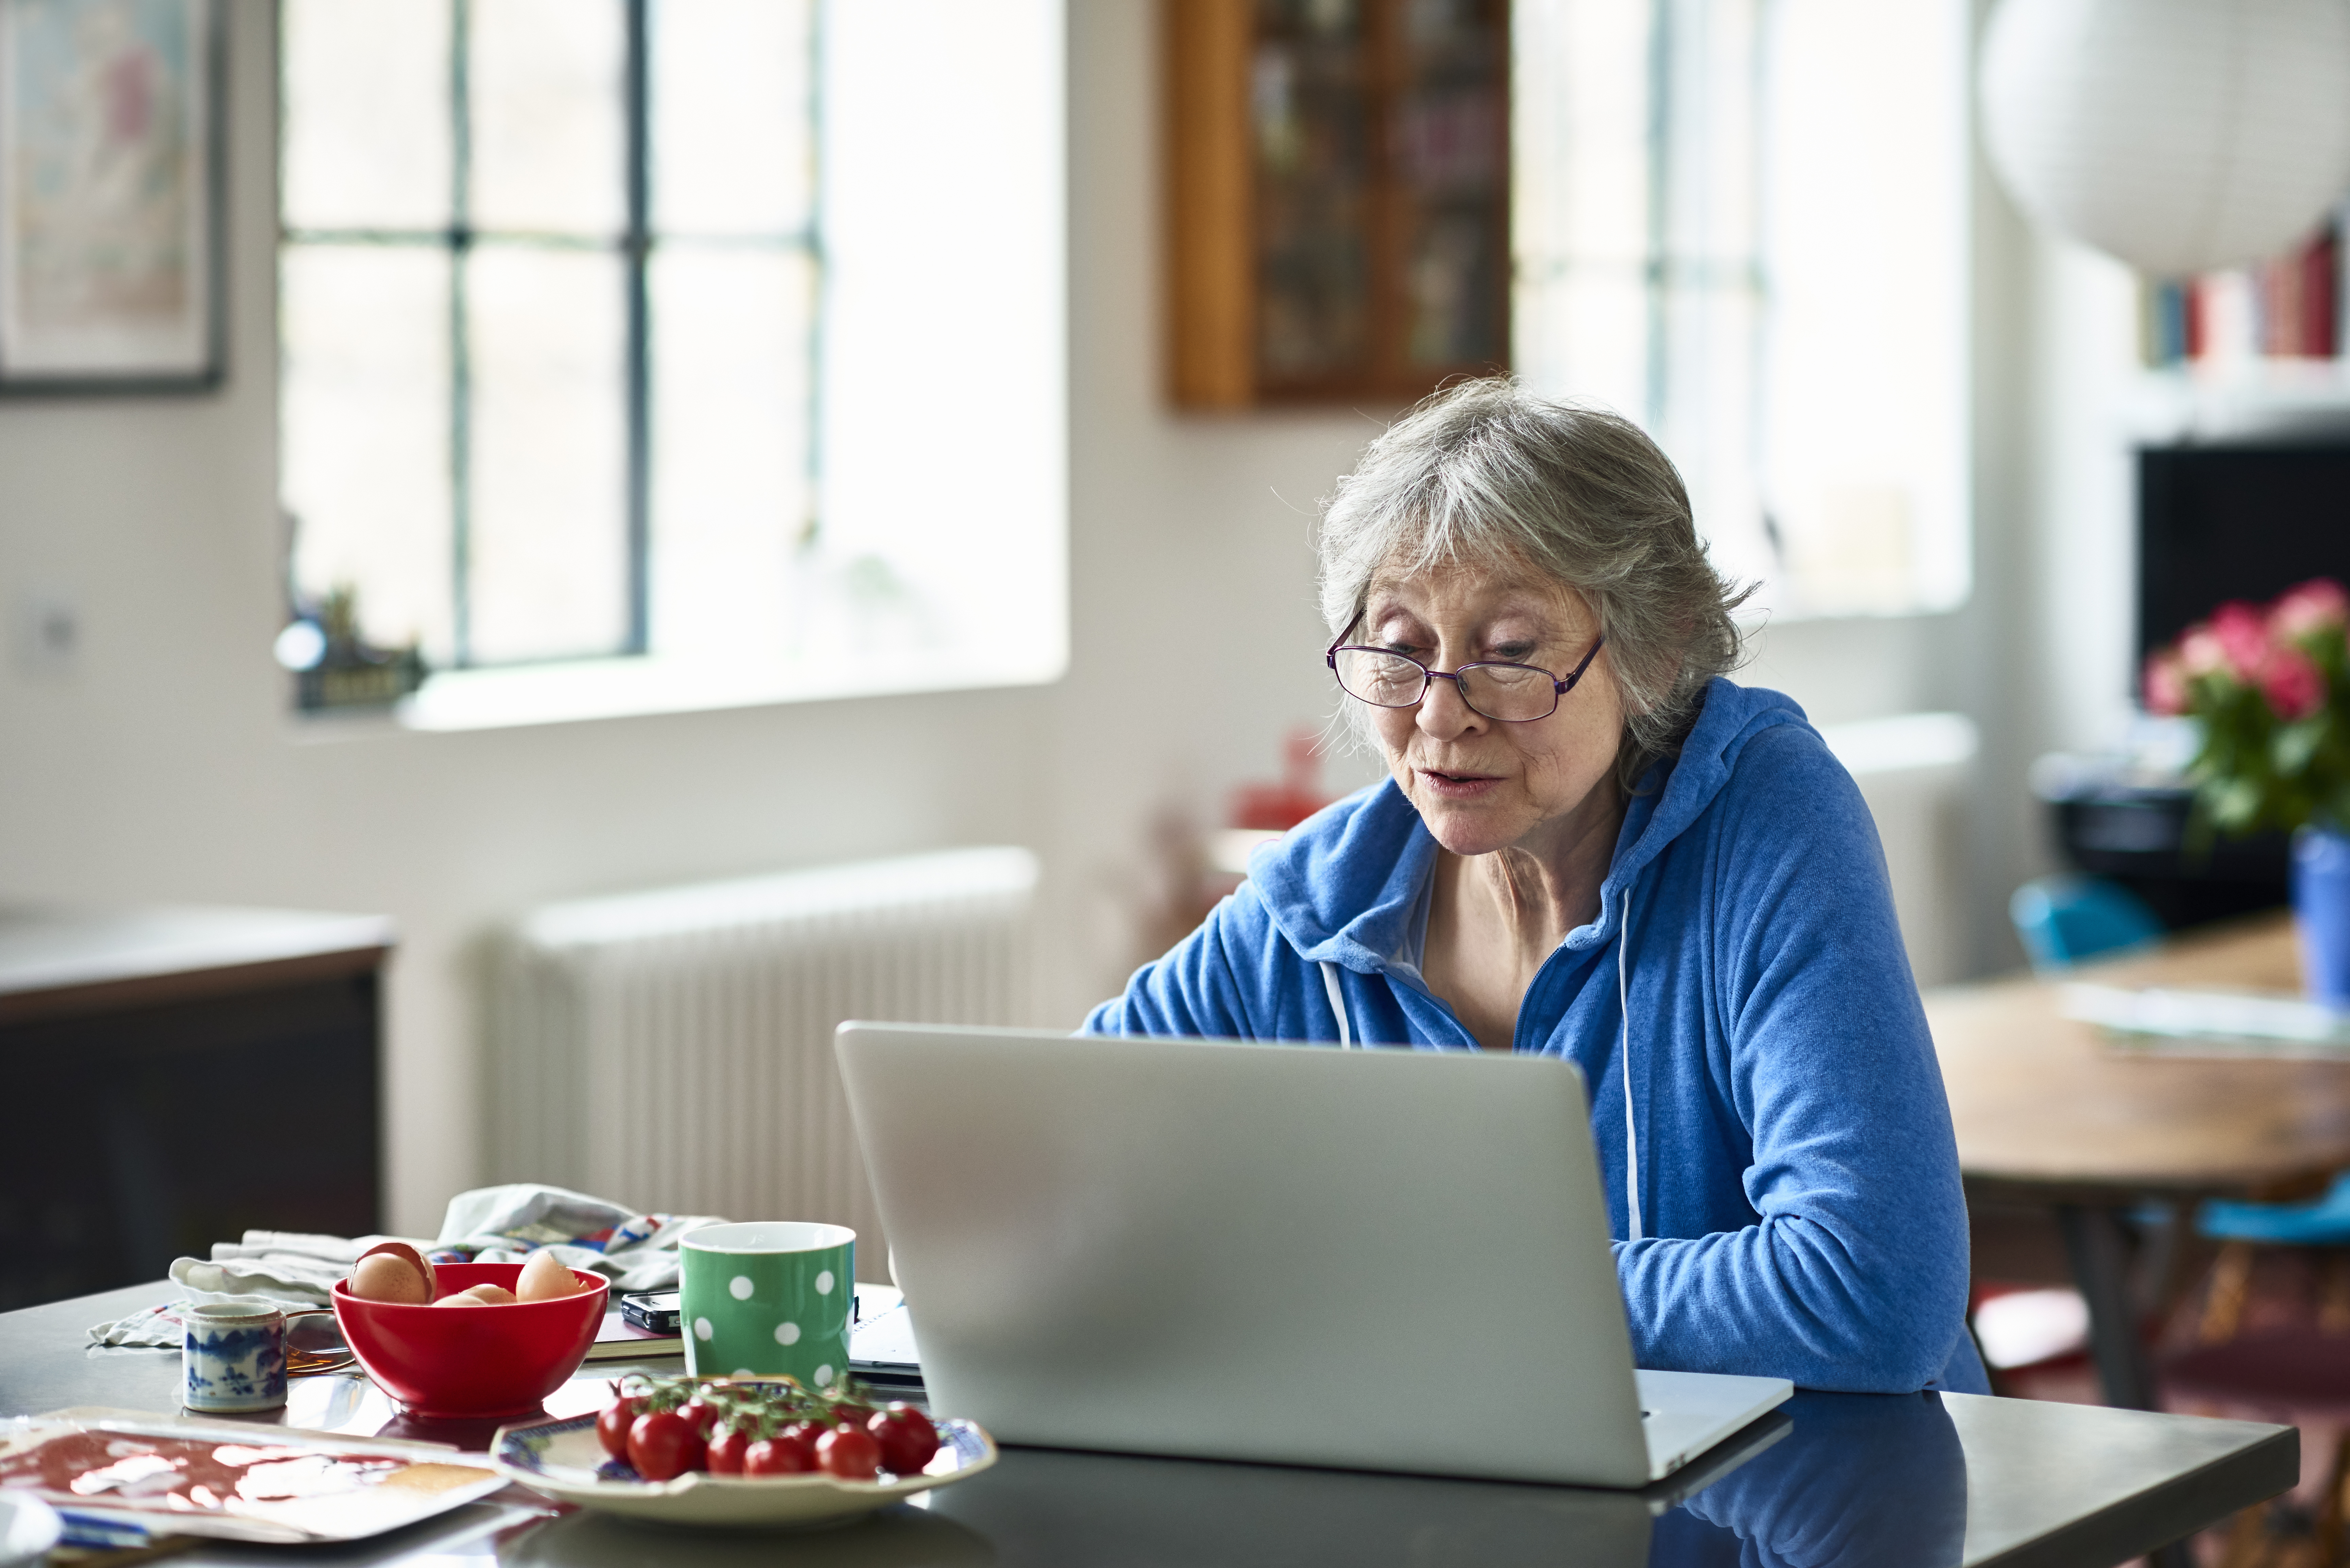 An older woman sitting at a kitchen table, looking at a laptop computer.